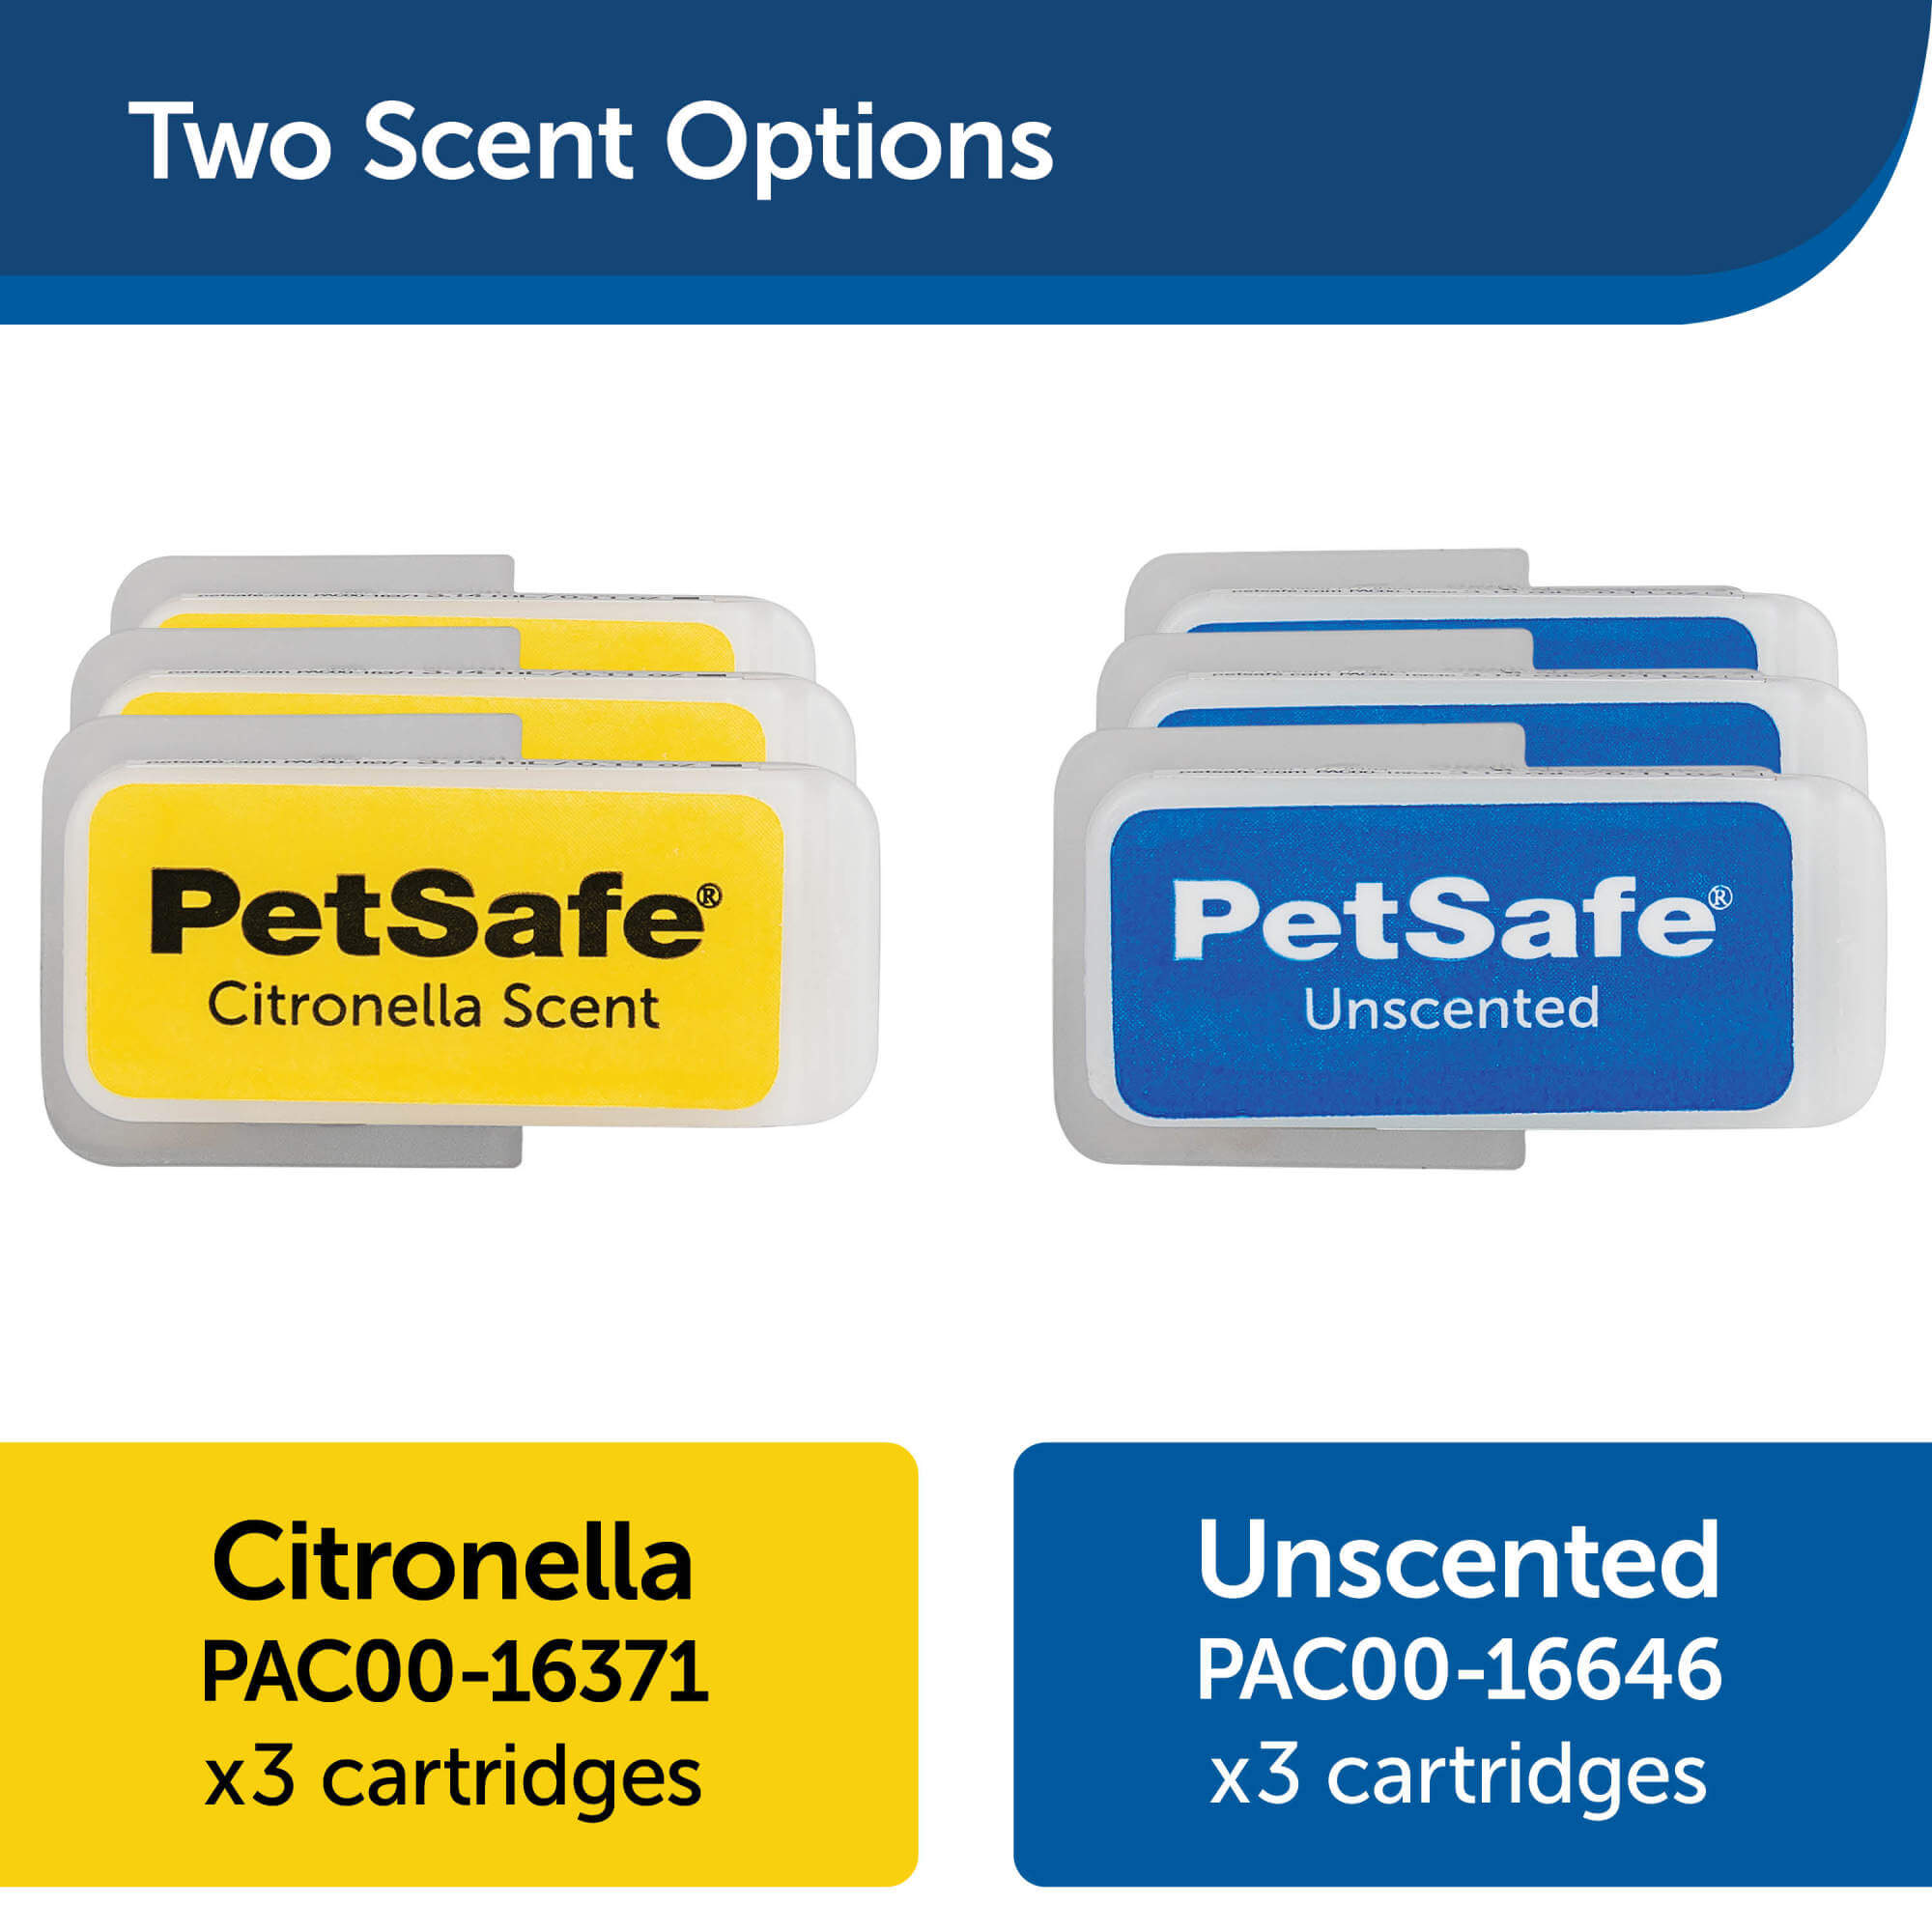 Two scent options - citronella and unscented